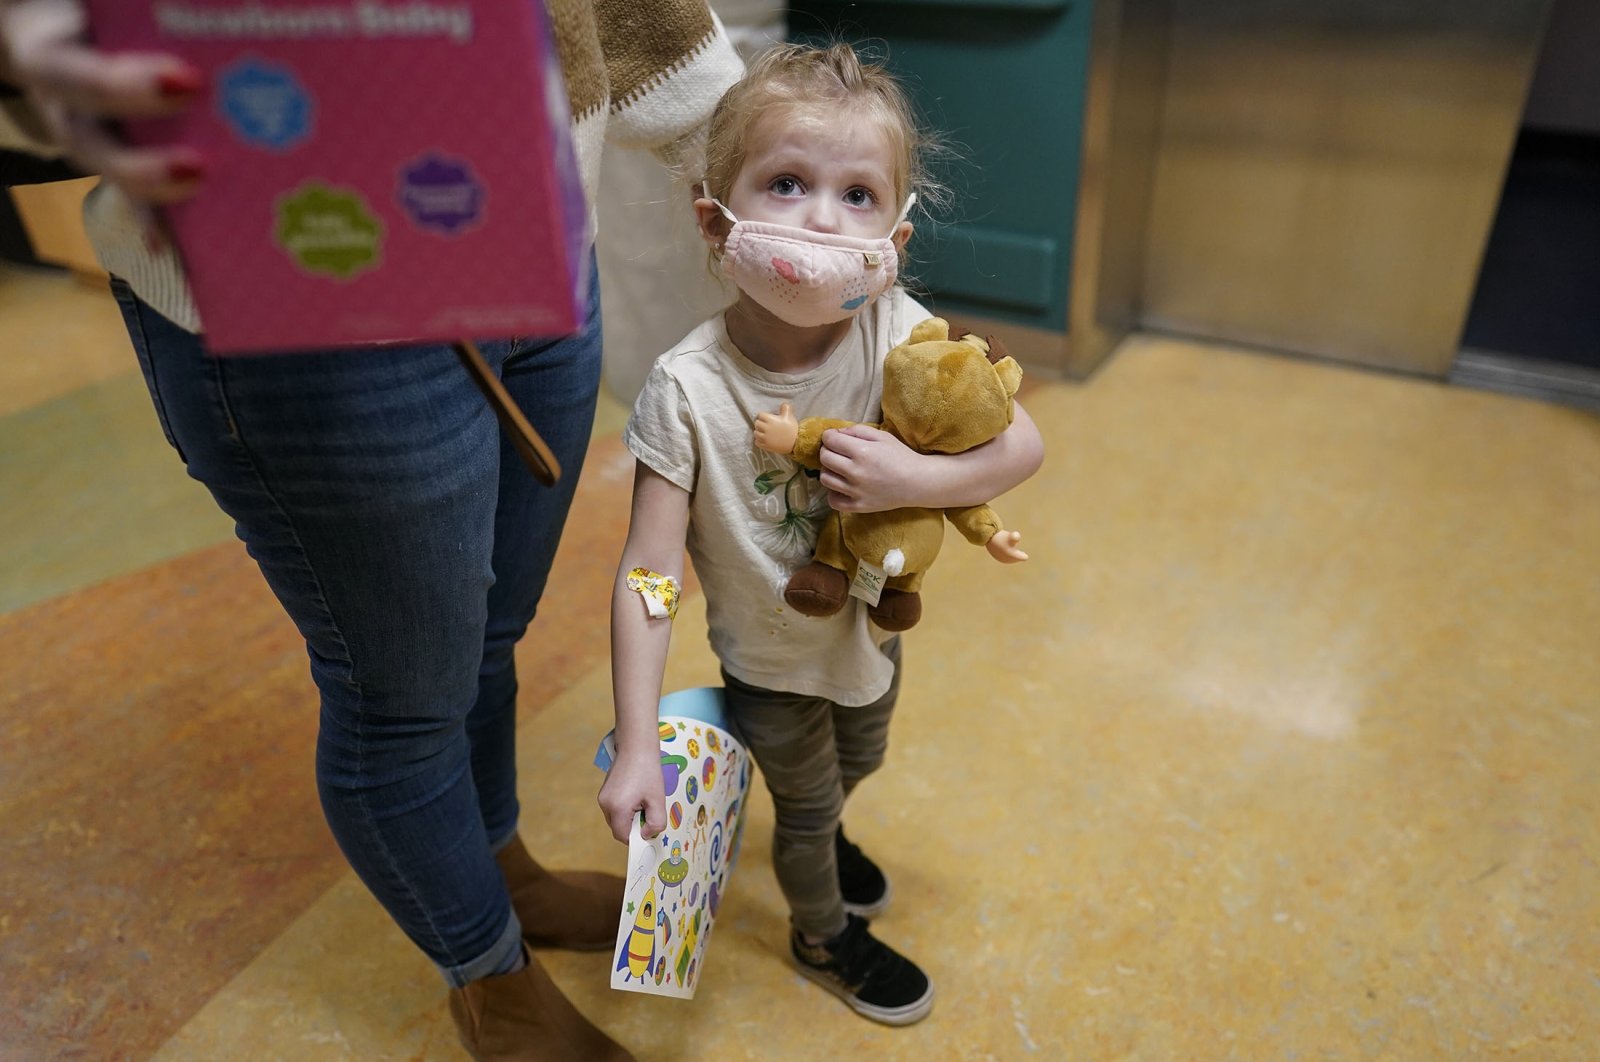 Alyssa Carpenter, 3, waits for the elevator with her mother, Tara Carpenter, with stickers and toys given to her during her followup visit to Children&#039;s National Hospital in Washington, U.S., Feb. 28, 2022. (AP Photo)